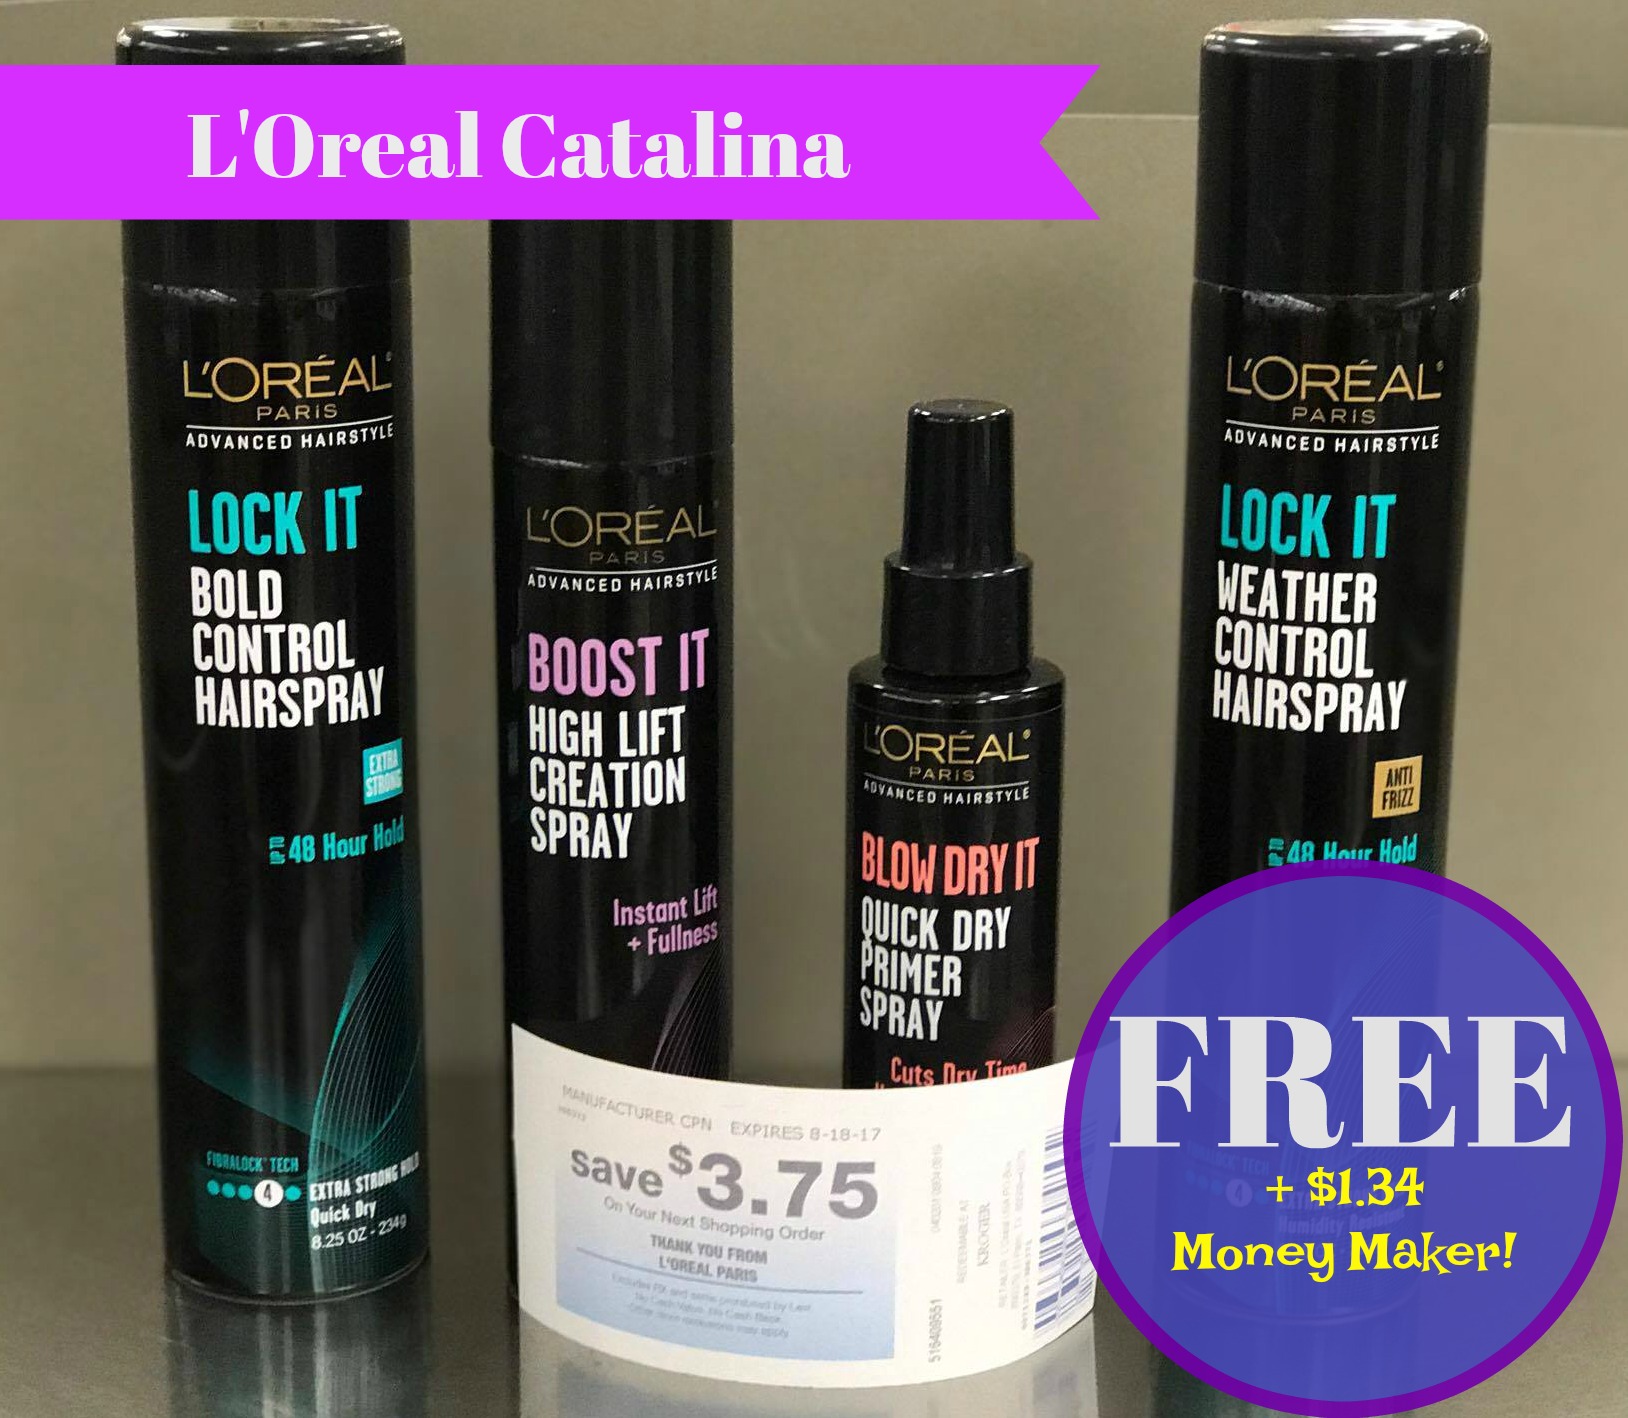 L’Oreal Catalina | Advanced Hairstylers = FREE + $1.34 Money Maker with